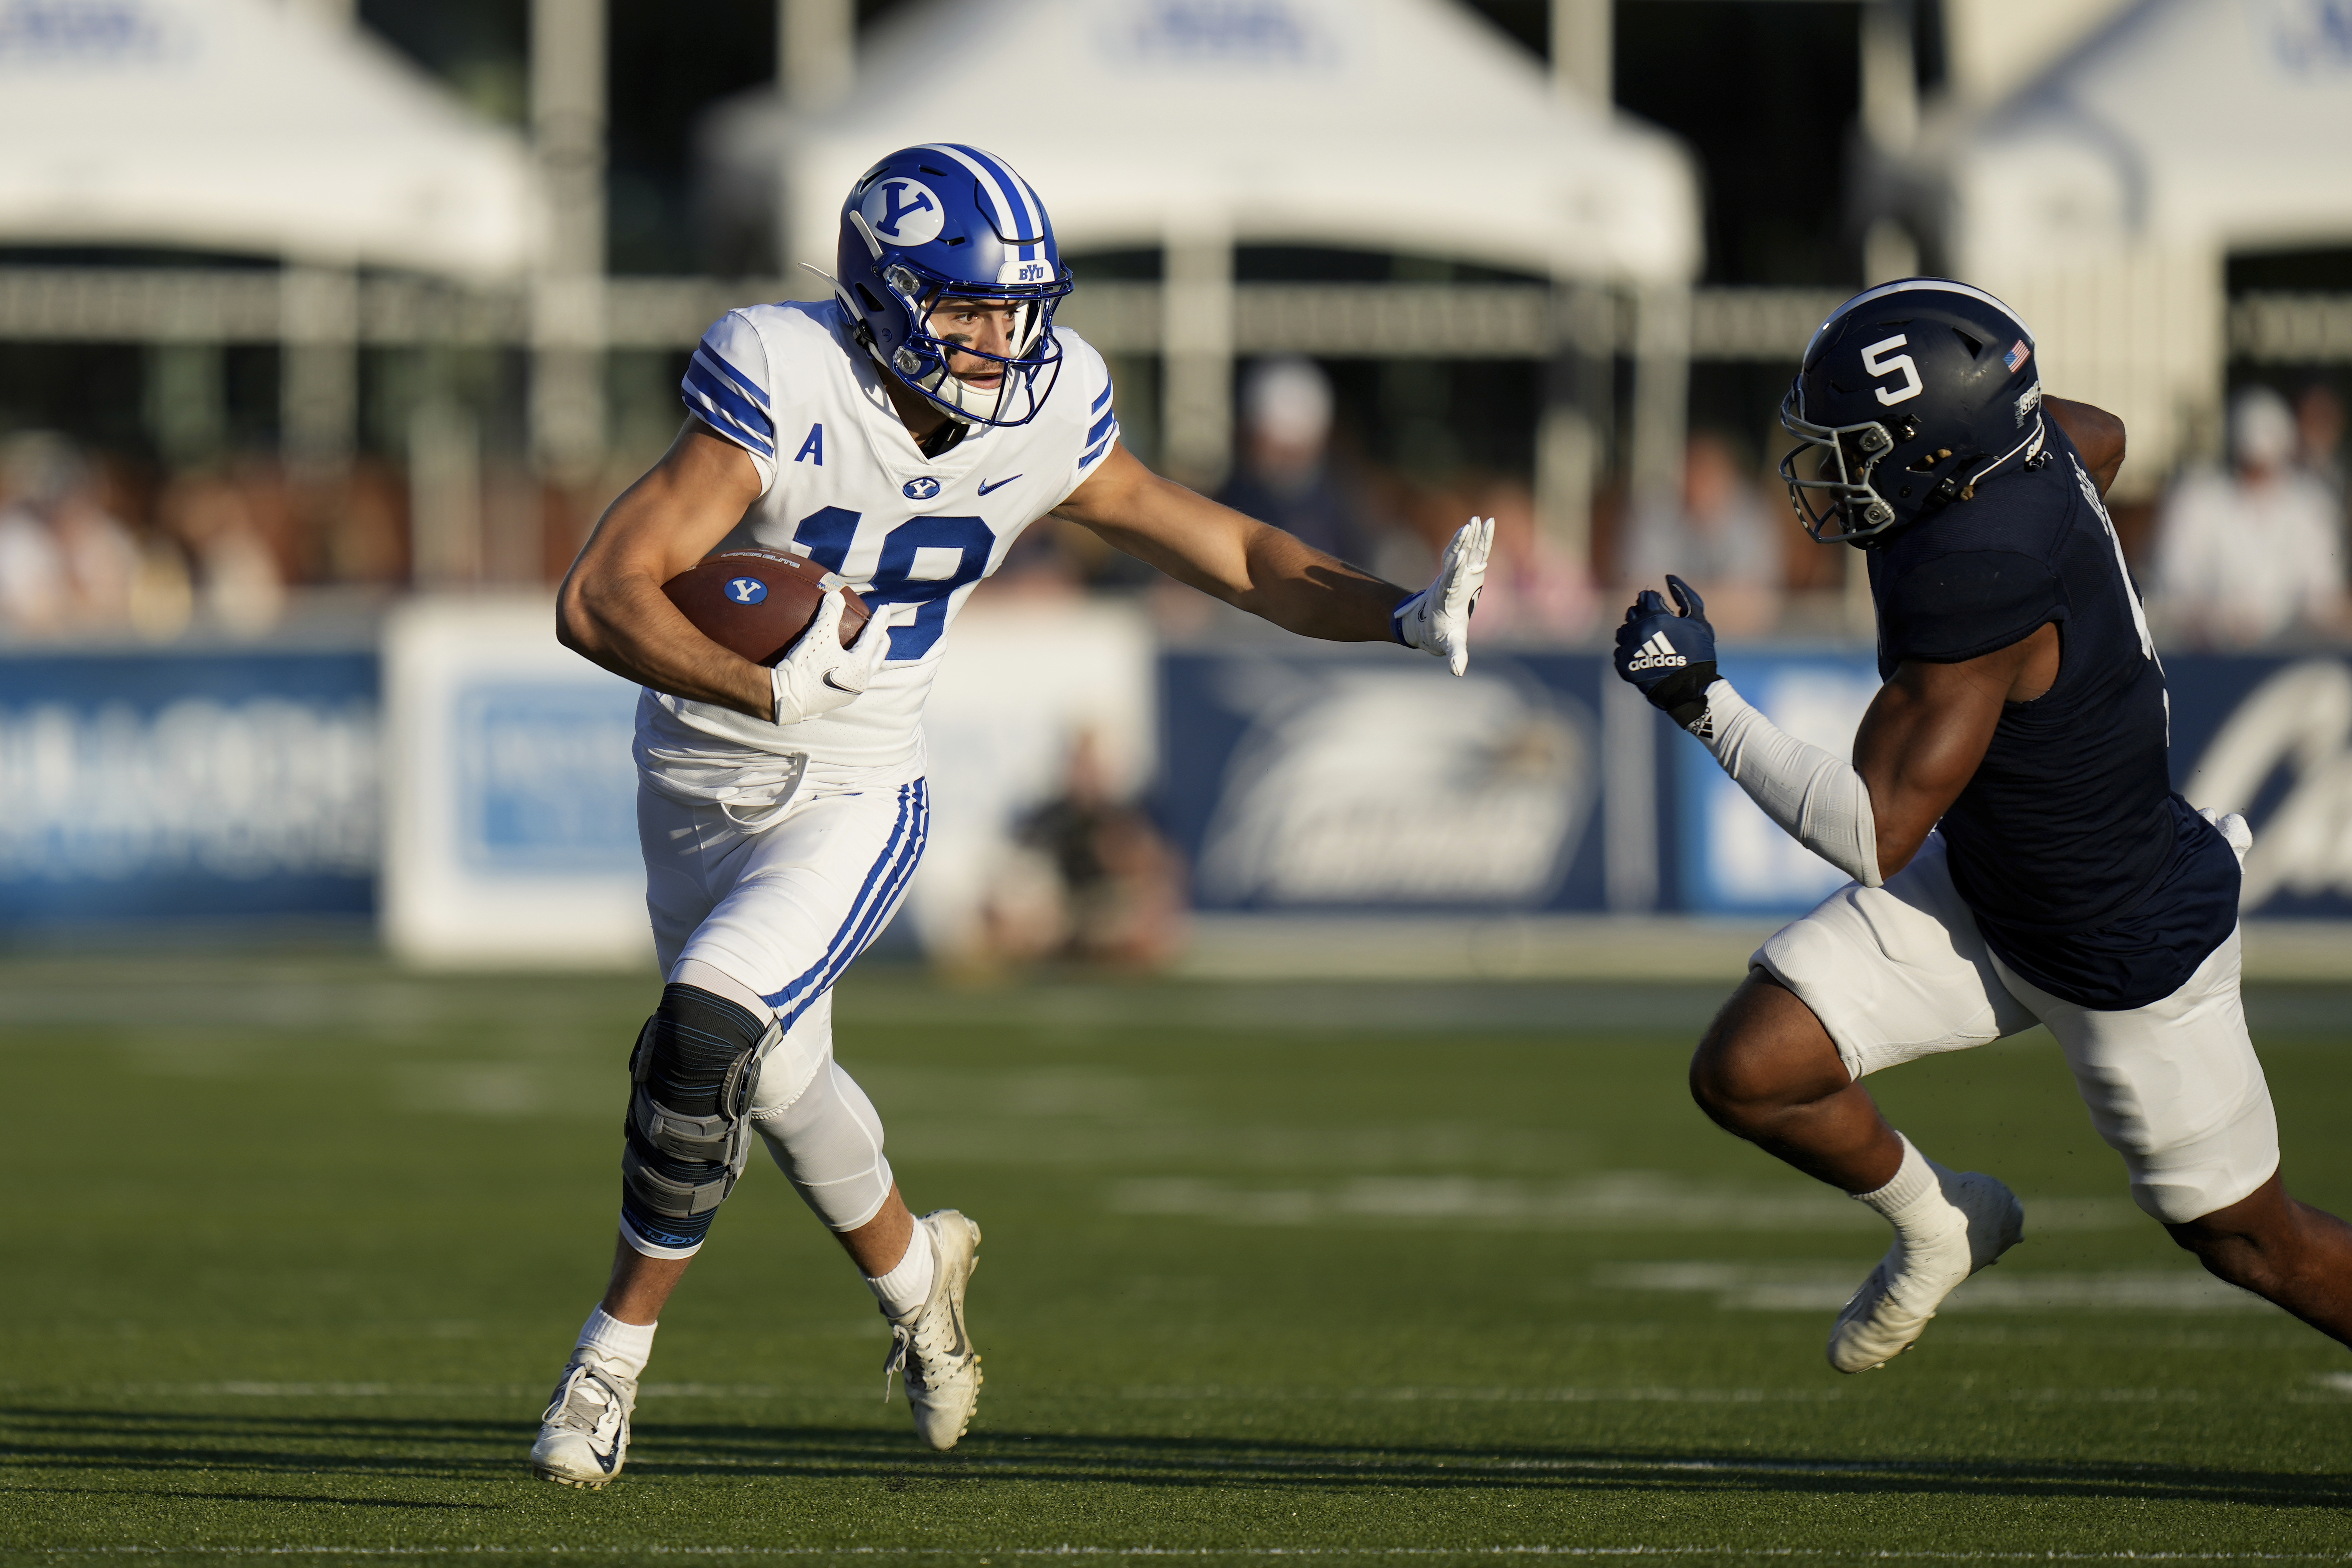 Highlights, key plays, photo from No. 14 BYU's win over Georgia Southern